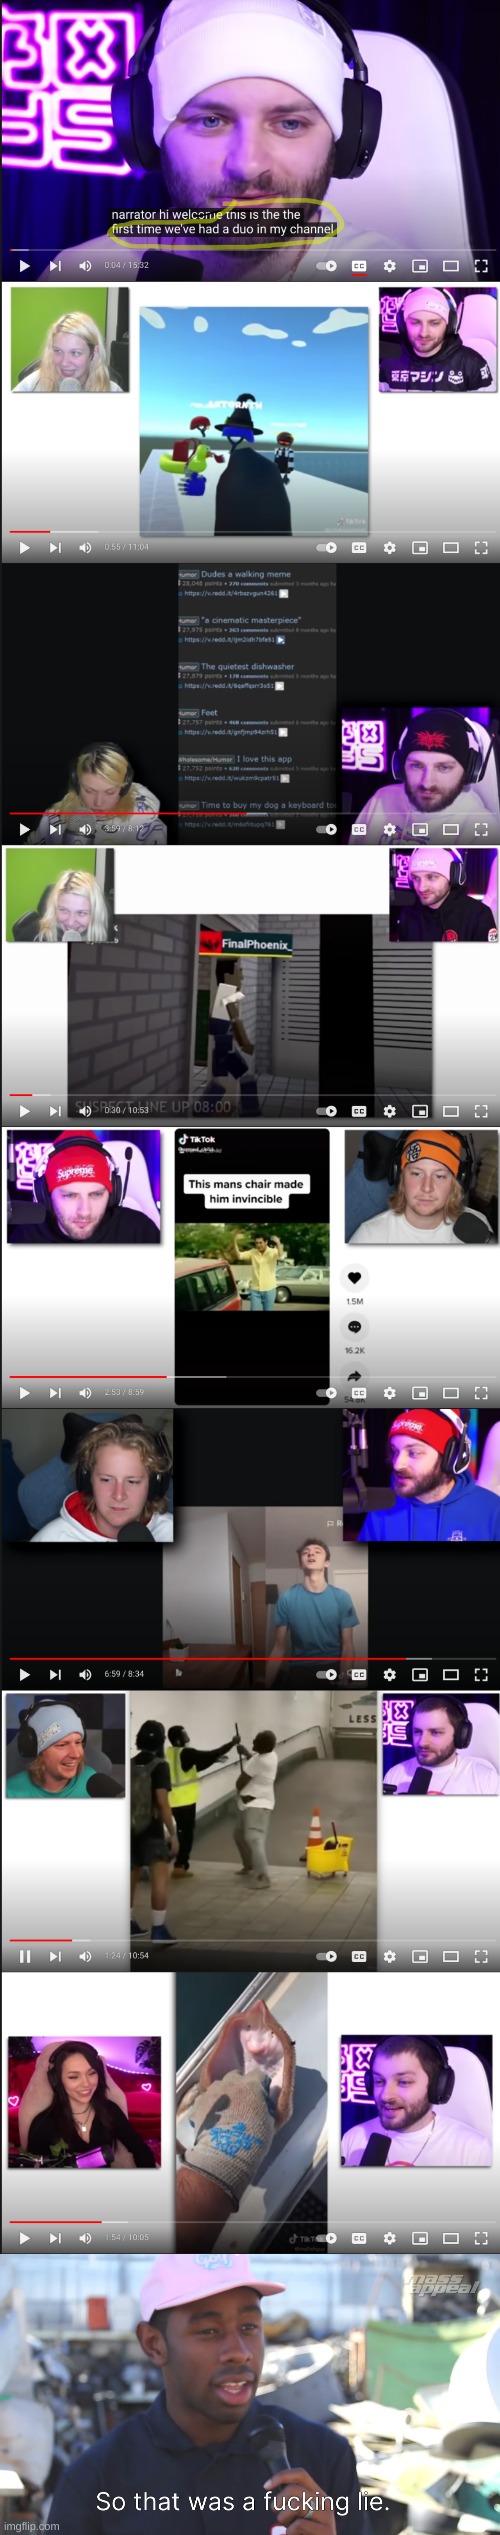 hmmmmm joshdub has some explaining to do | image tagged in youtuber | made w/ Imgflip meme maker